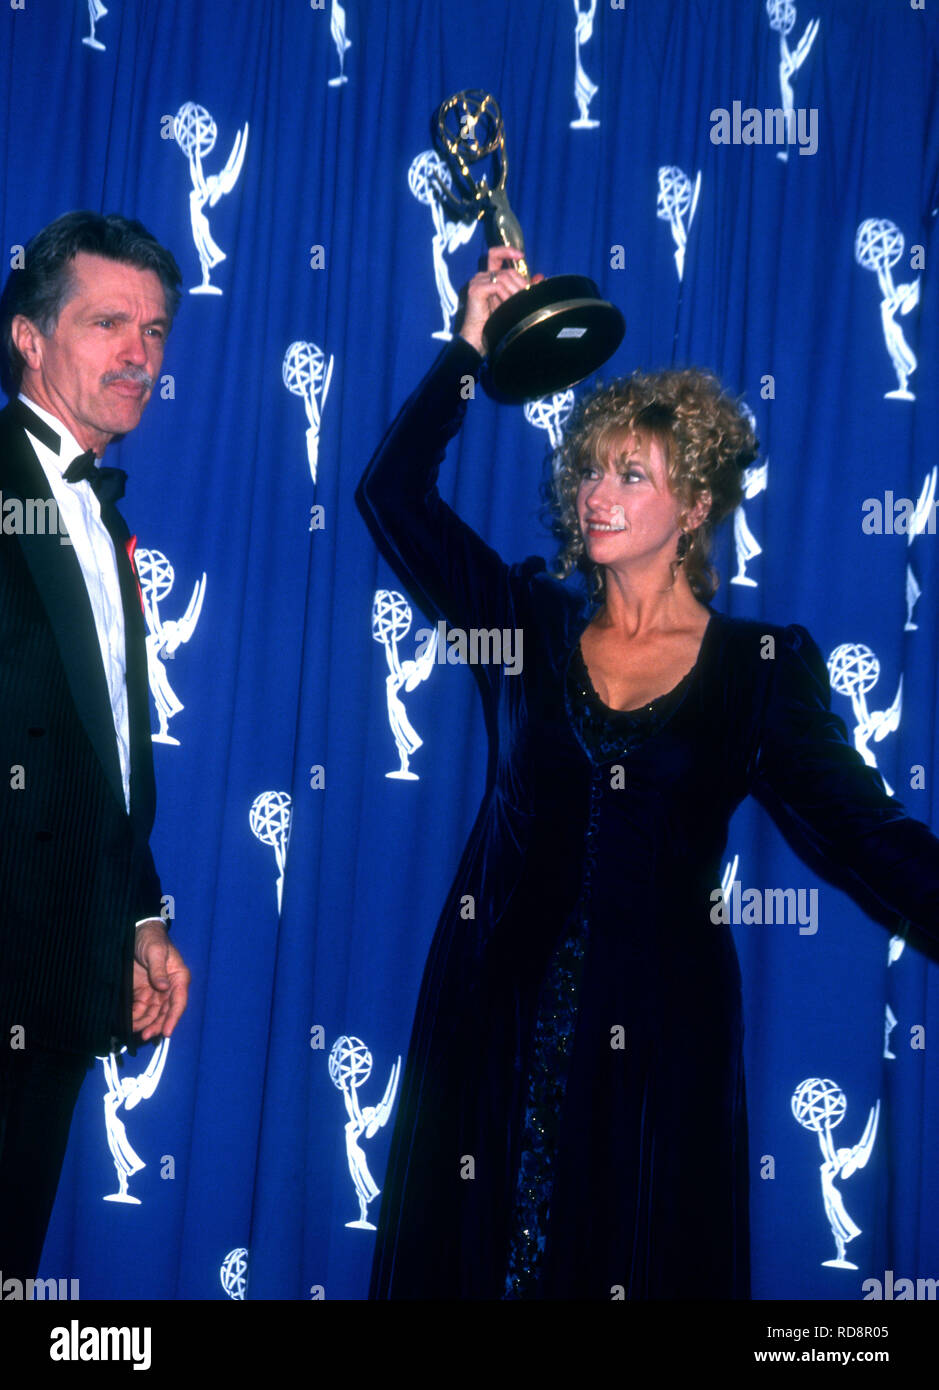 PASADENA, CA - SEPTEMBER 19: Actor Tom Skerritt and actress Kathy Baker attends the 45th Annual Primetime Emmy Awards on September 19, 1993 at Pasadena Civic Auditorium in Pasadena, California. Photo by Barry King/Alamy Stock Photo Stock Photo